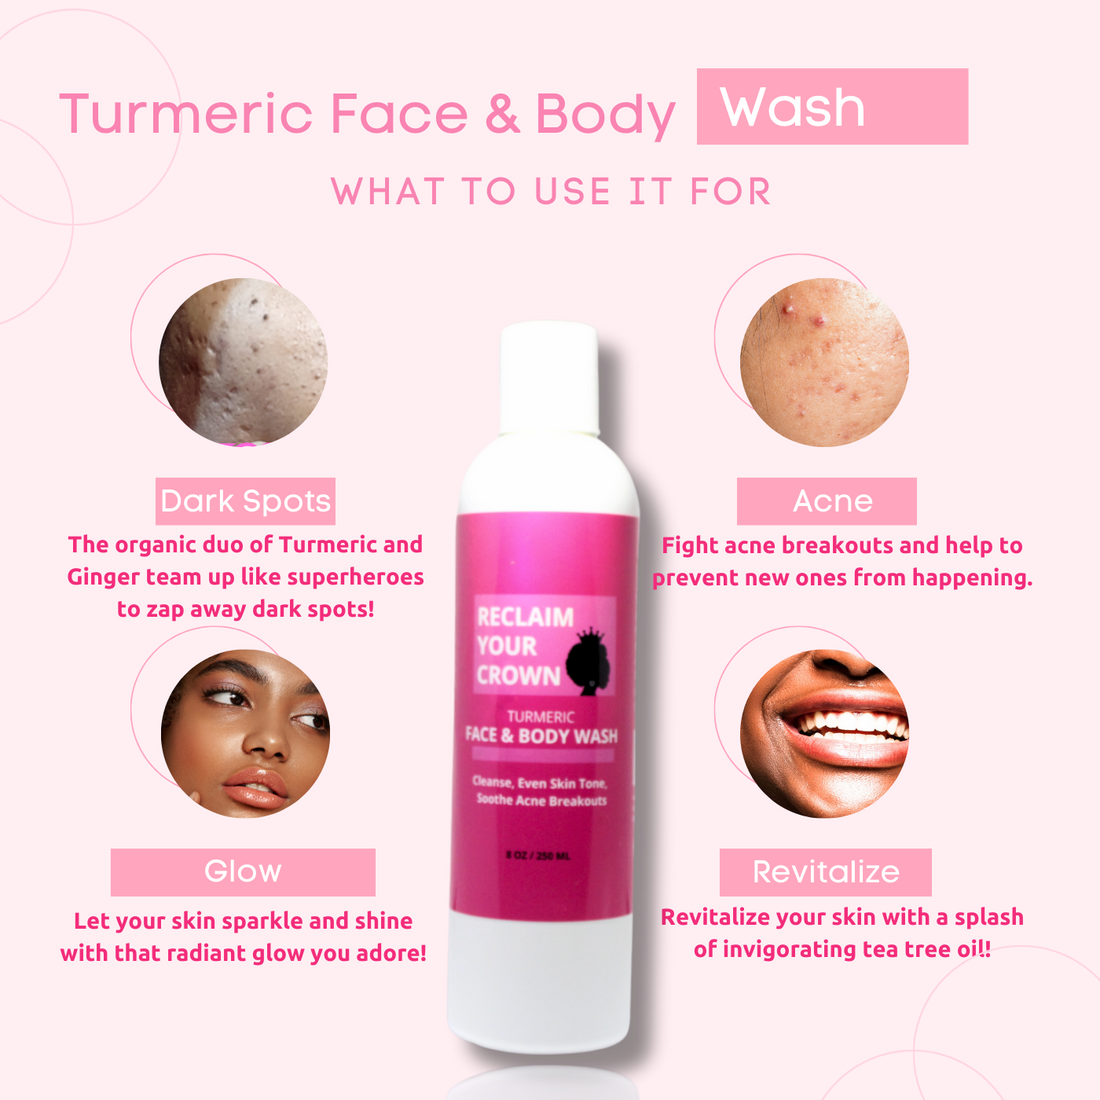 Turmeric Face & Body Wash for removing dark spots and hyperpigmentation